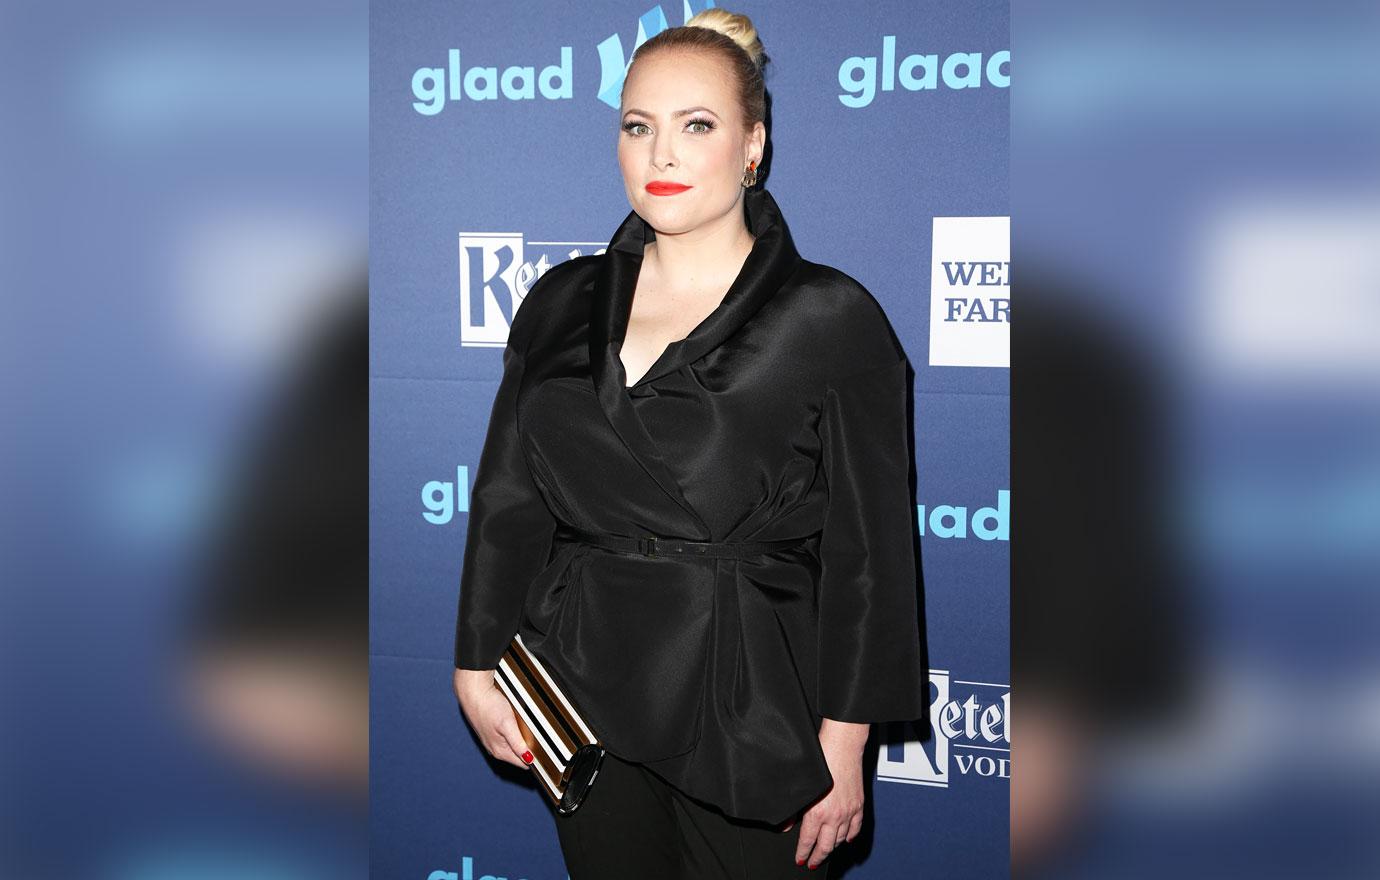 Twitter Thrilled With Meghan McCain Exit From The View